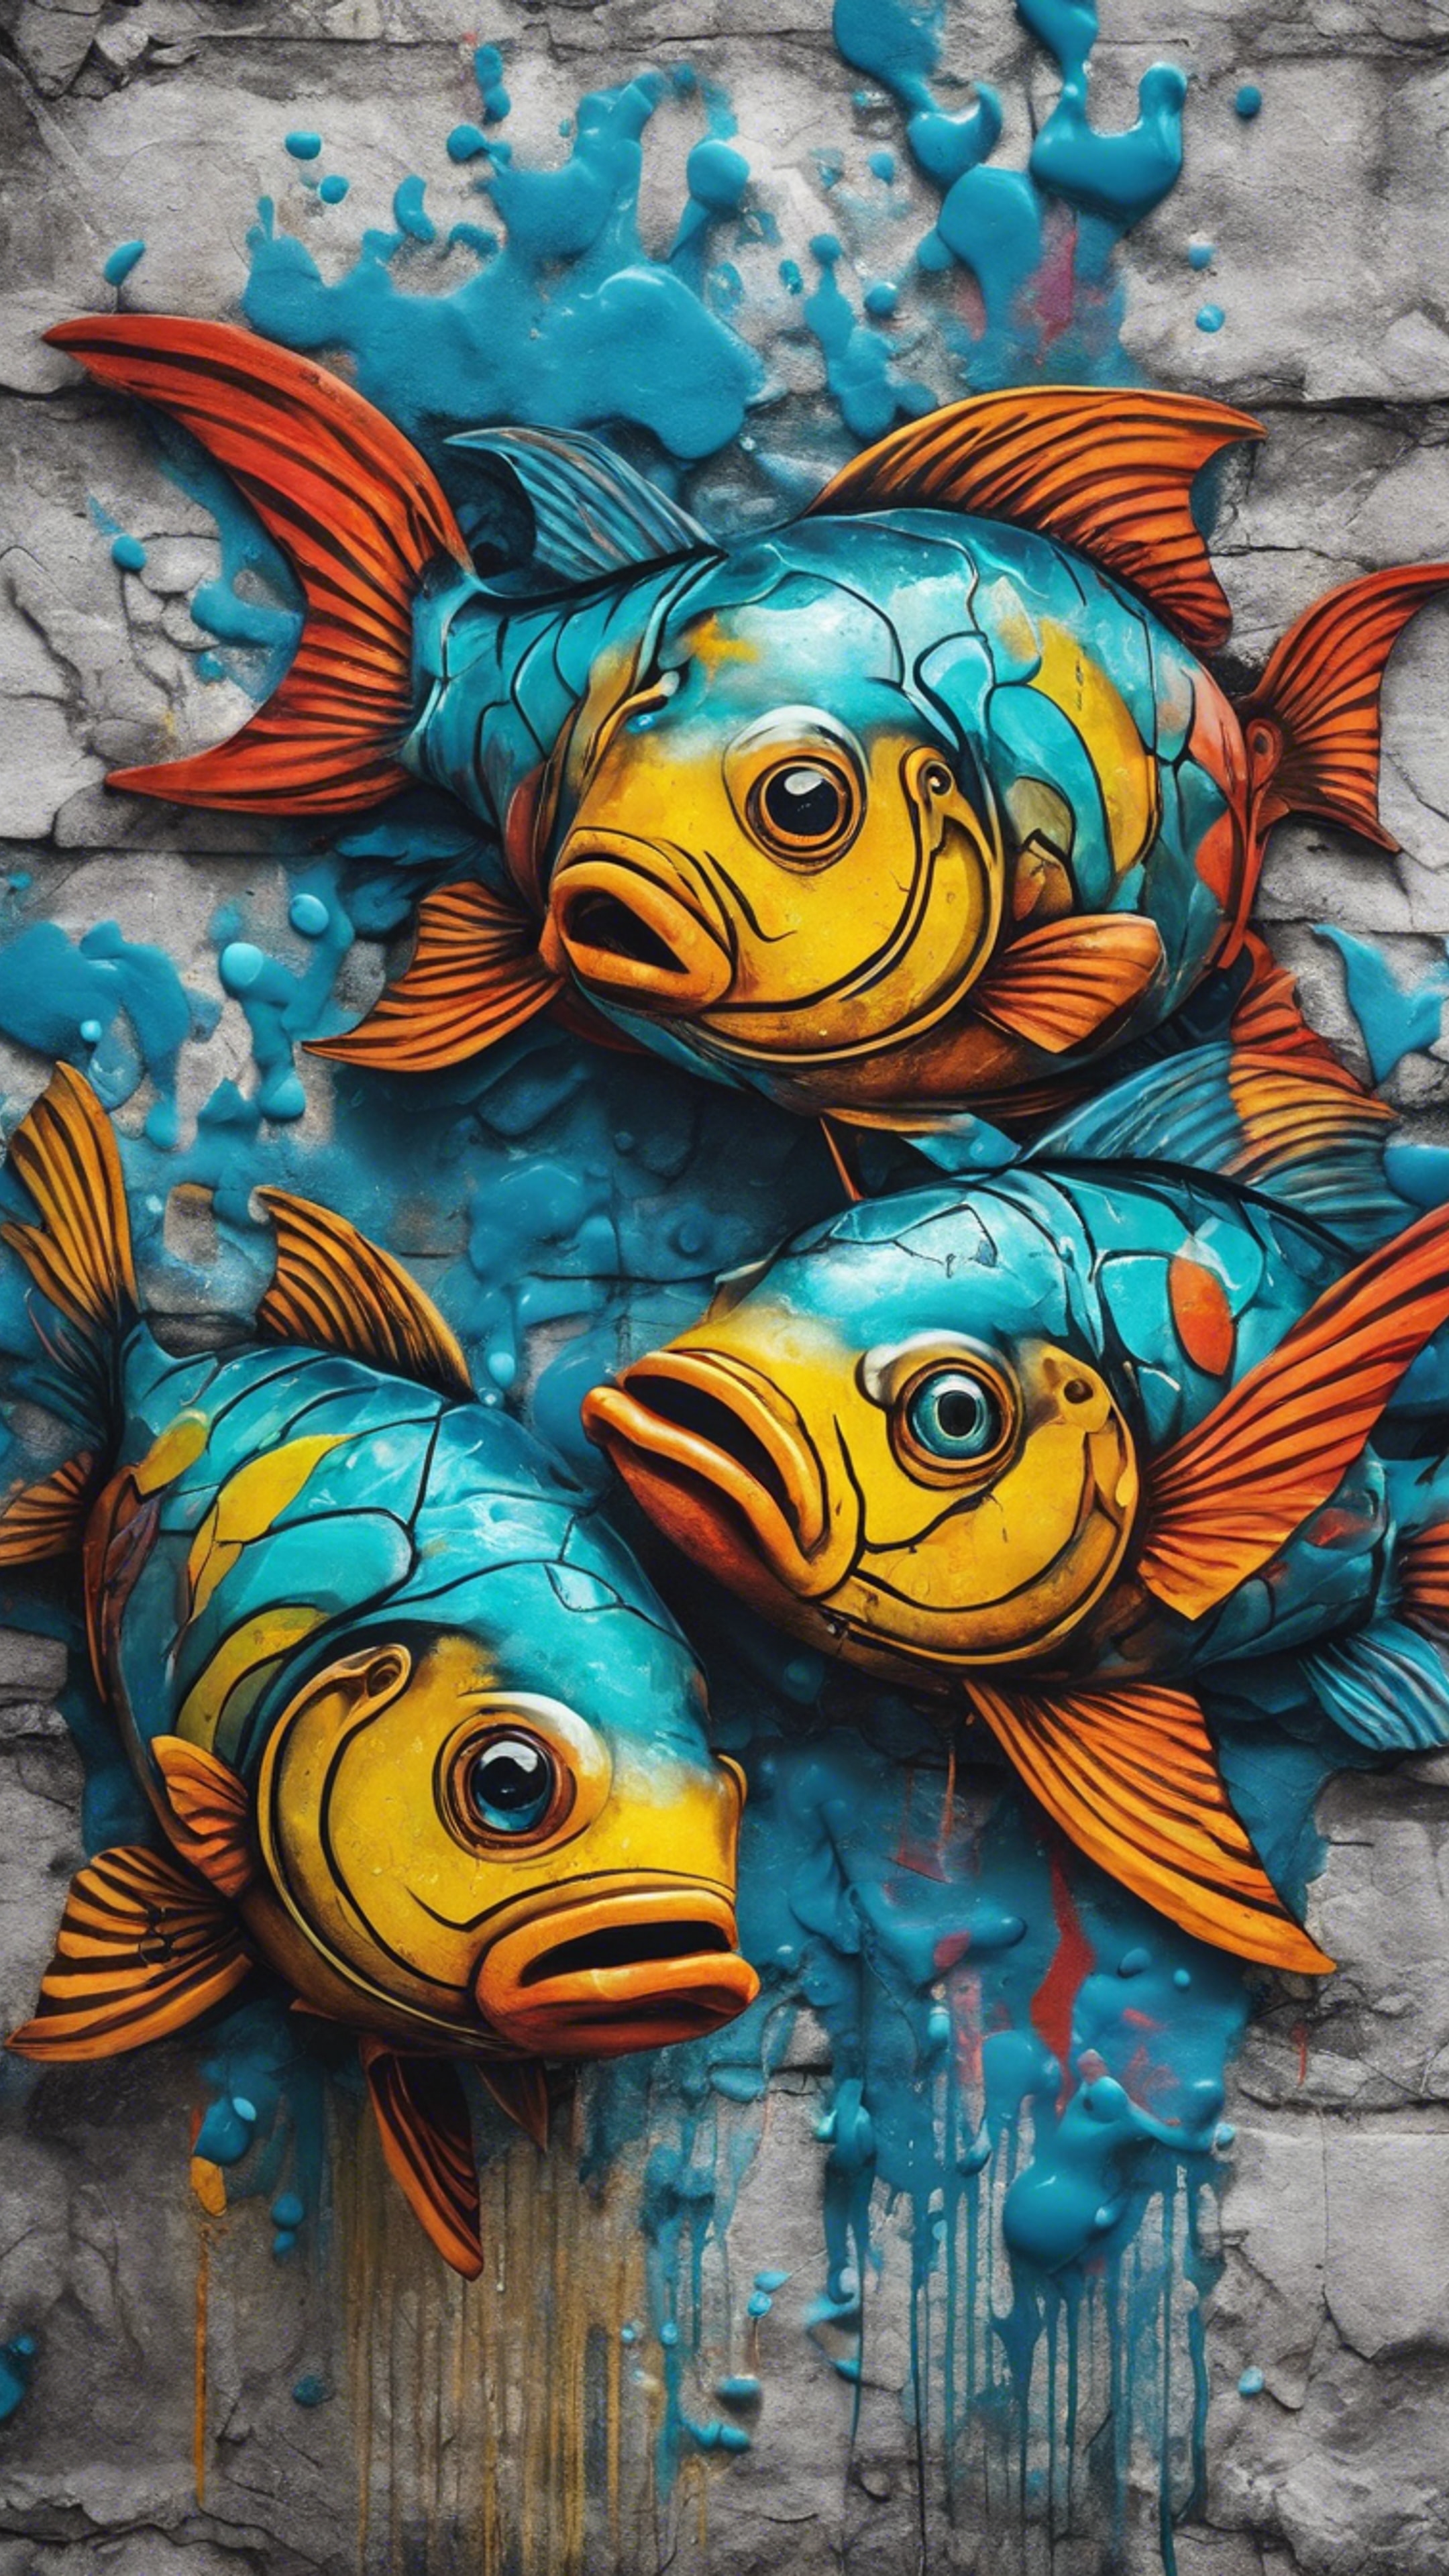 A vibrant street art depicting Pisces as two playful fish, on a textured wall with dynamic splashes of color. ورق الجدران[a1e08805c6ad437f94cb]